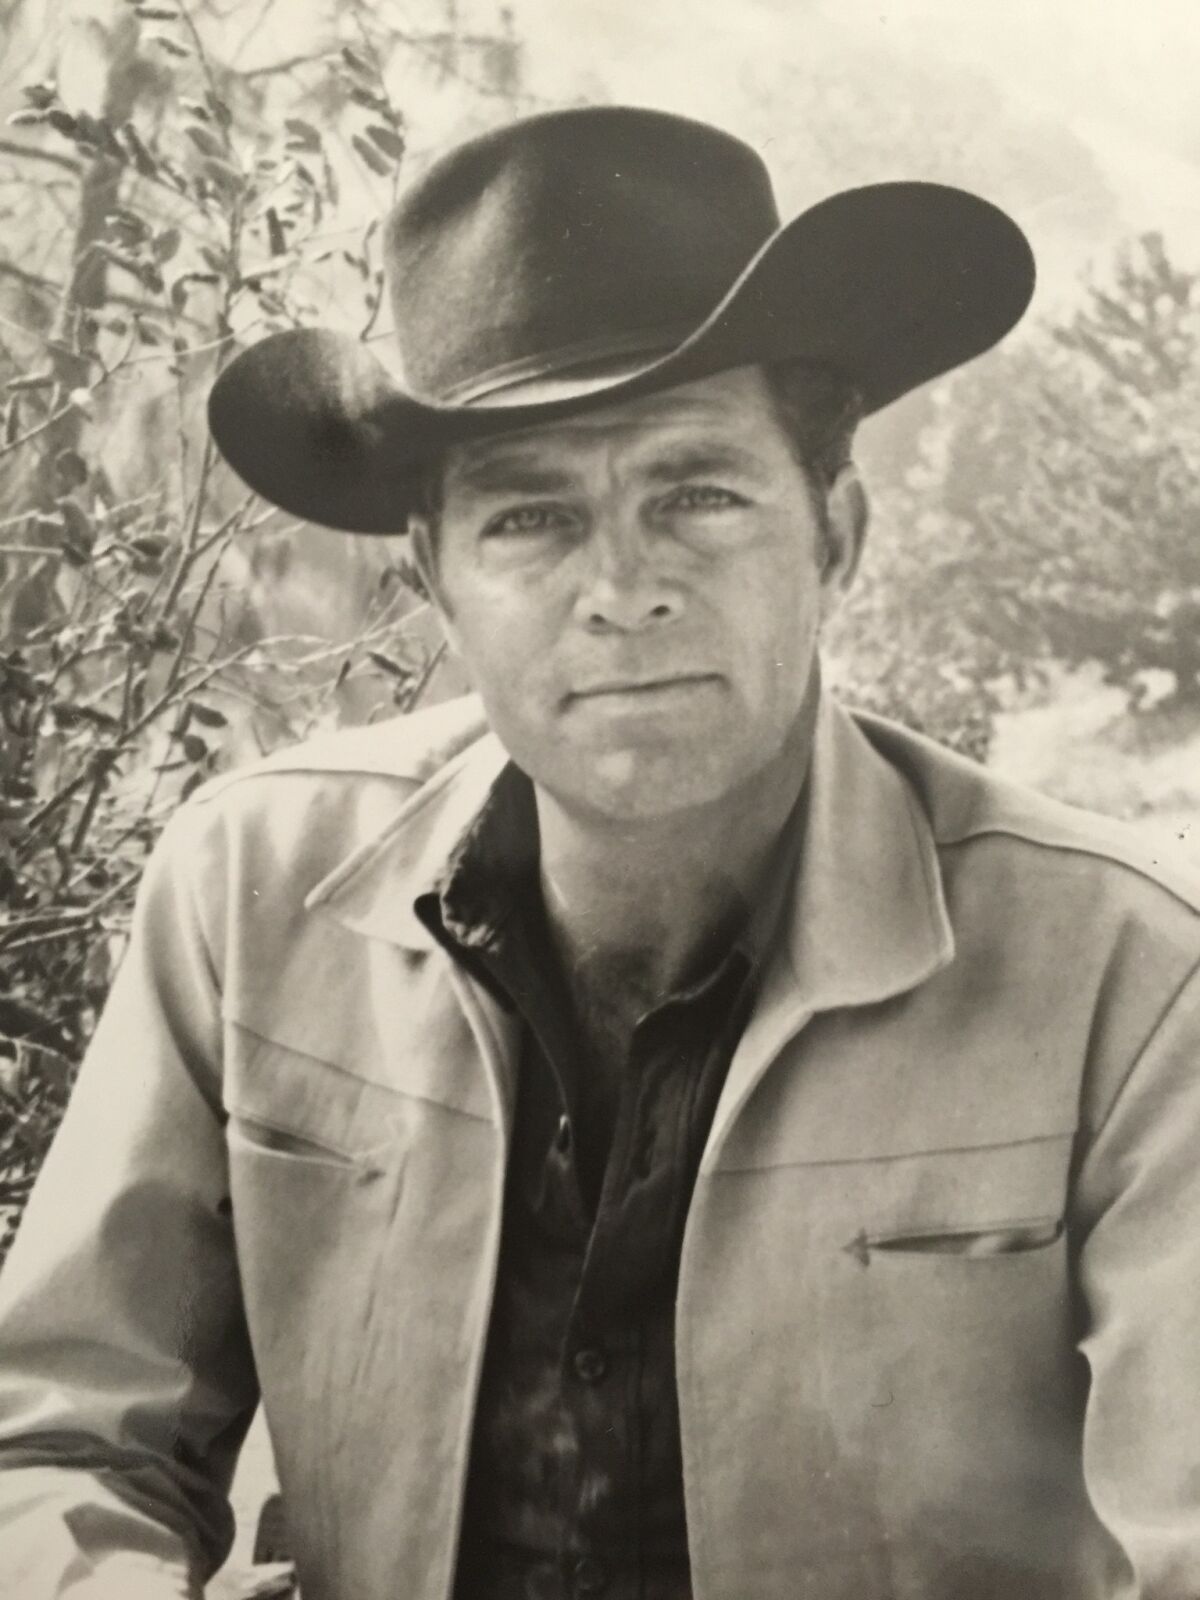 Wife of late film and TV actor Dale Robertson pens biography - Rancho Santa  Fe Review